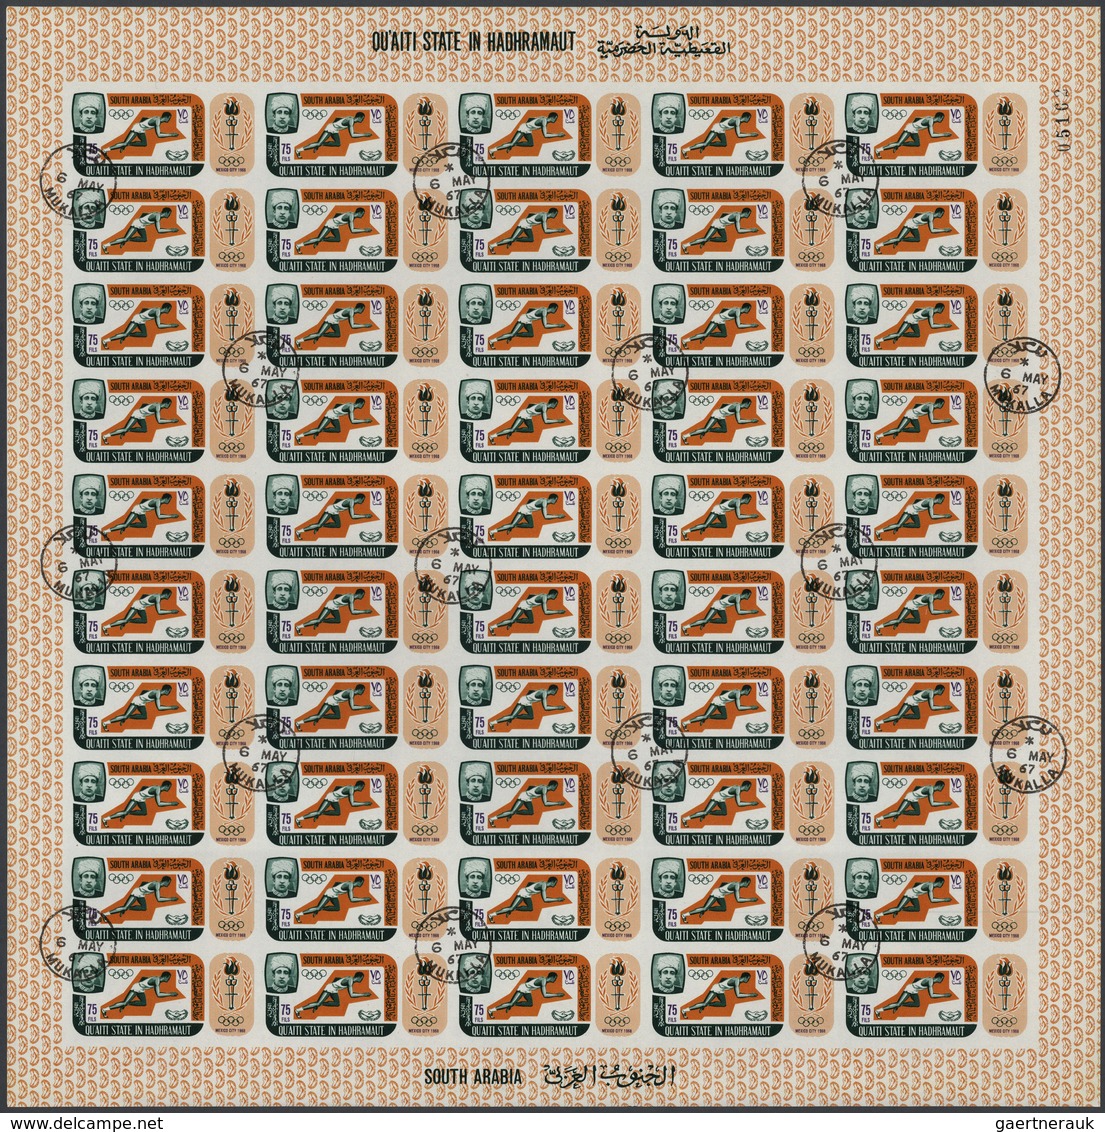 22033 Aden - Qu'aiti State In Hadhramaut: 1967, 75f. Olympic Games Mexico '68, Accumulation Of 6.950 Stamp - Yemen